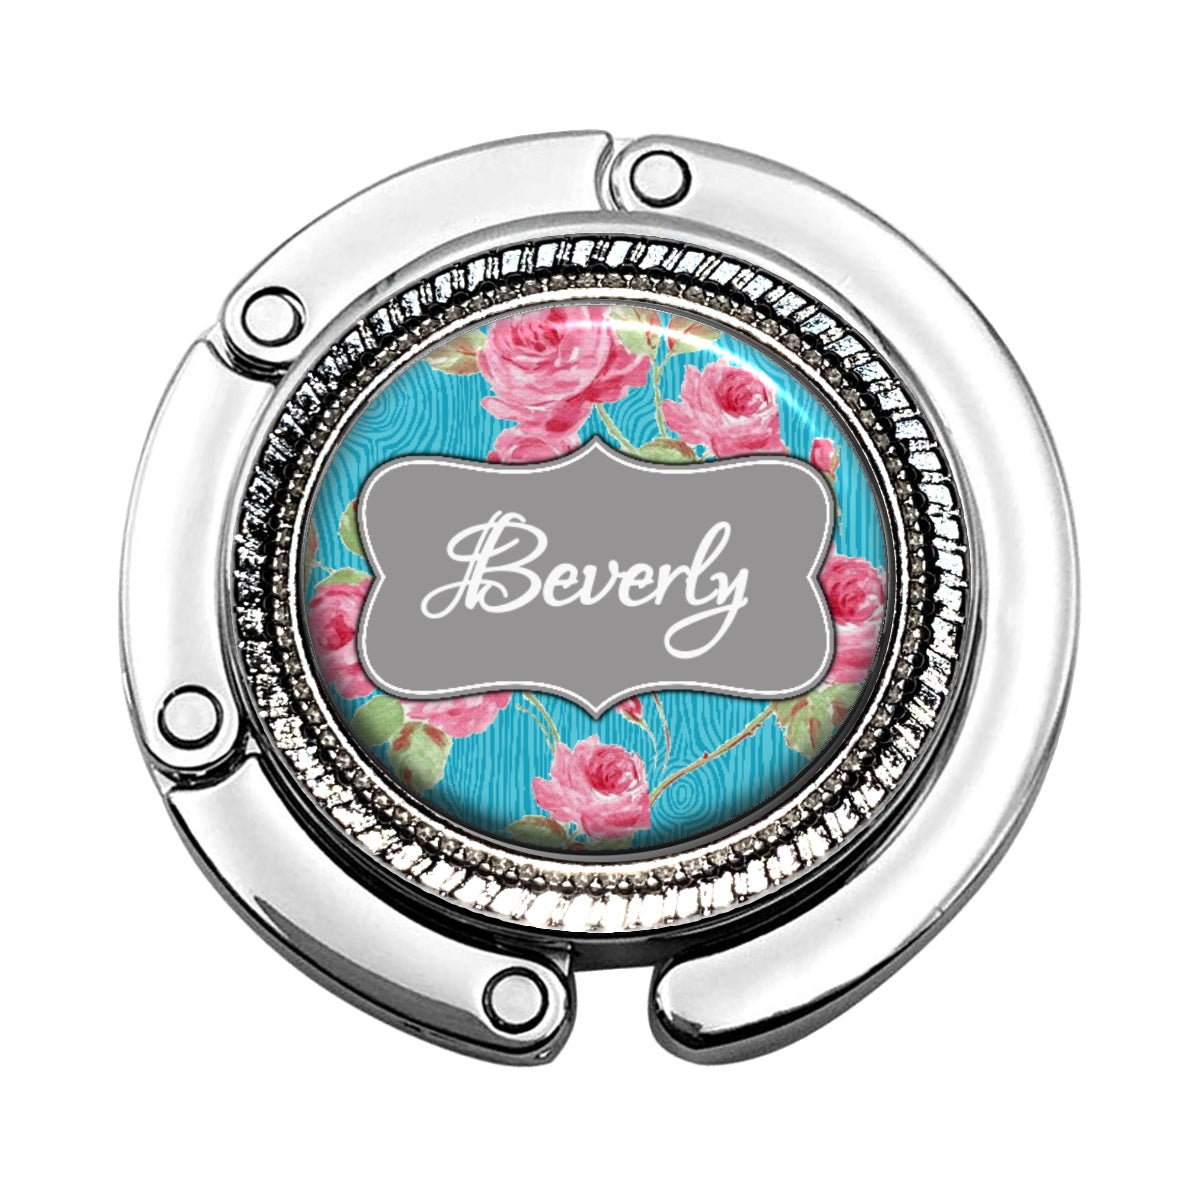 a bottle opener with a picture of roses on it